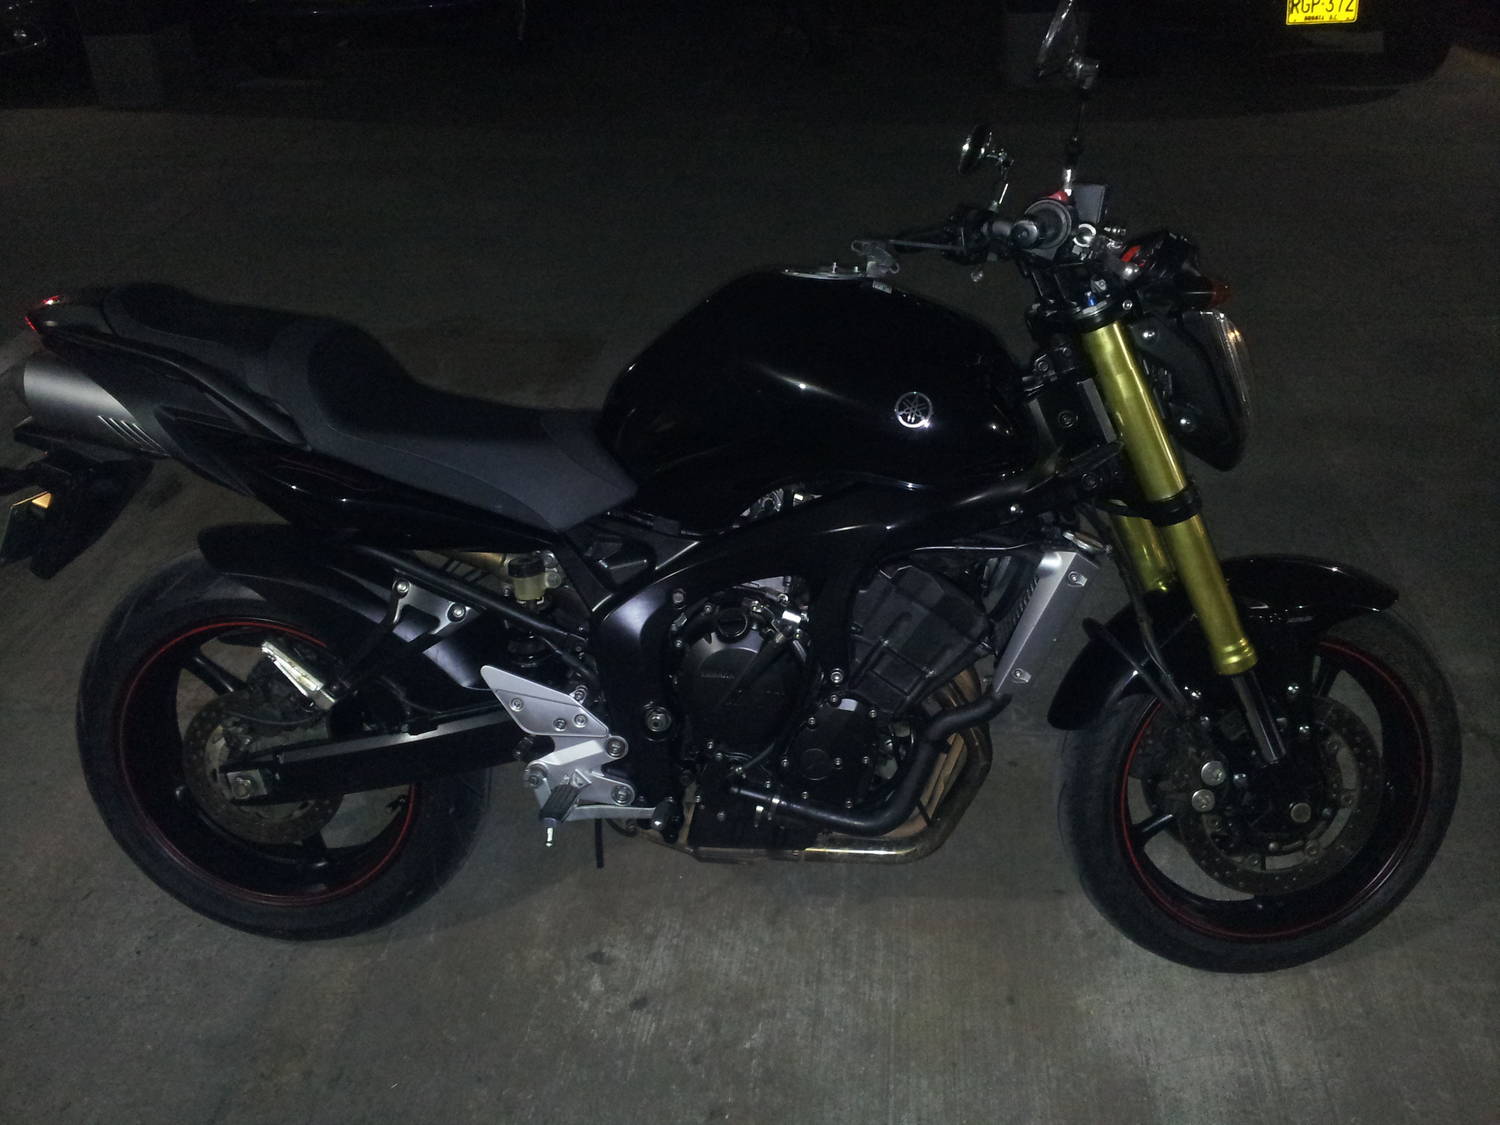 FZ6 S2 ABS with R1 USD Forks, FZ1 headlight and smoke stop light